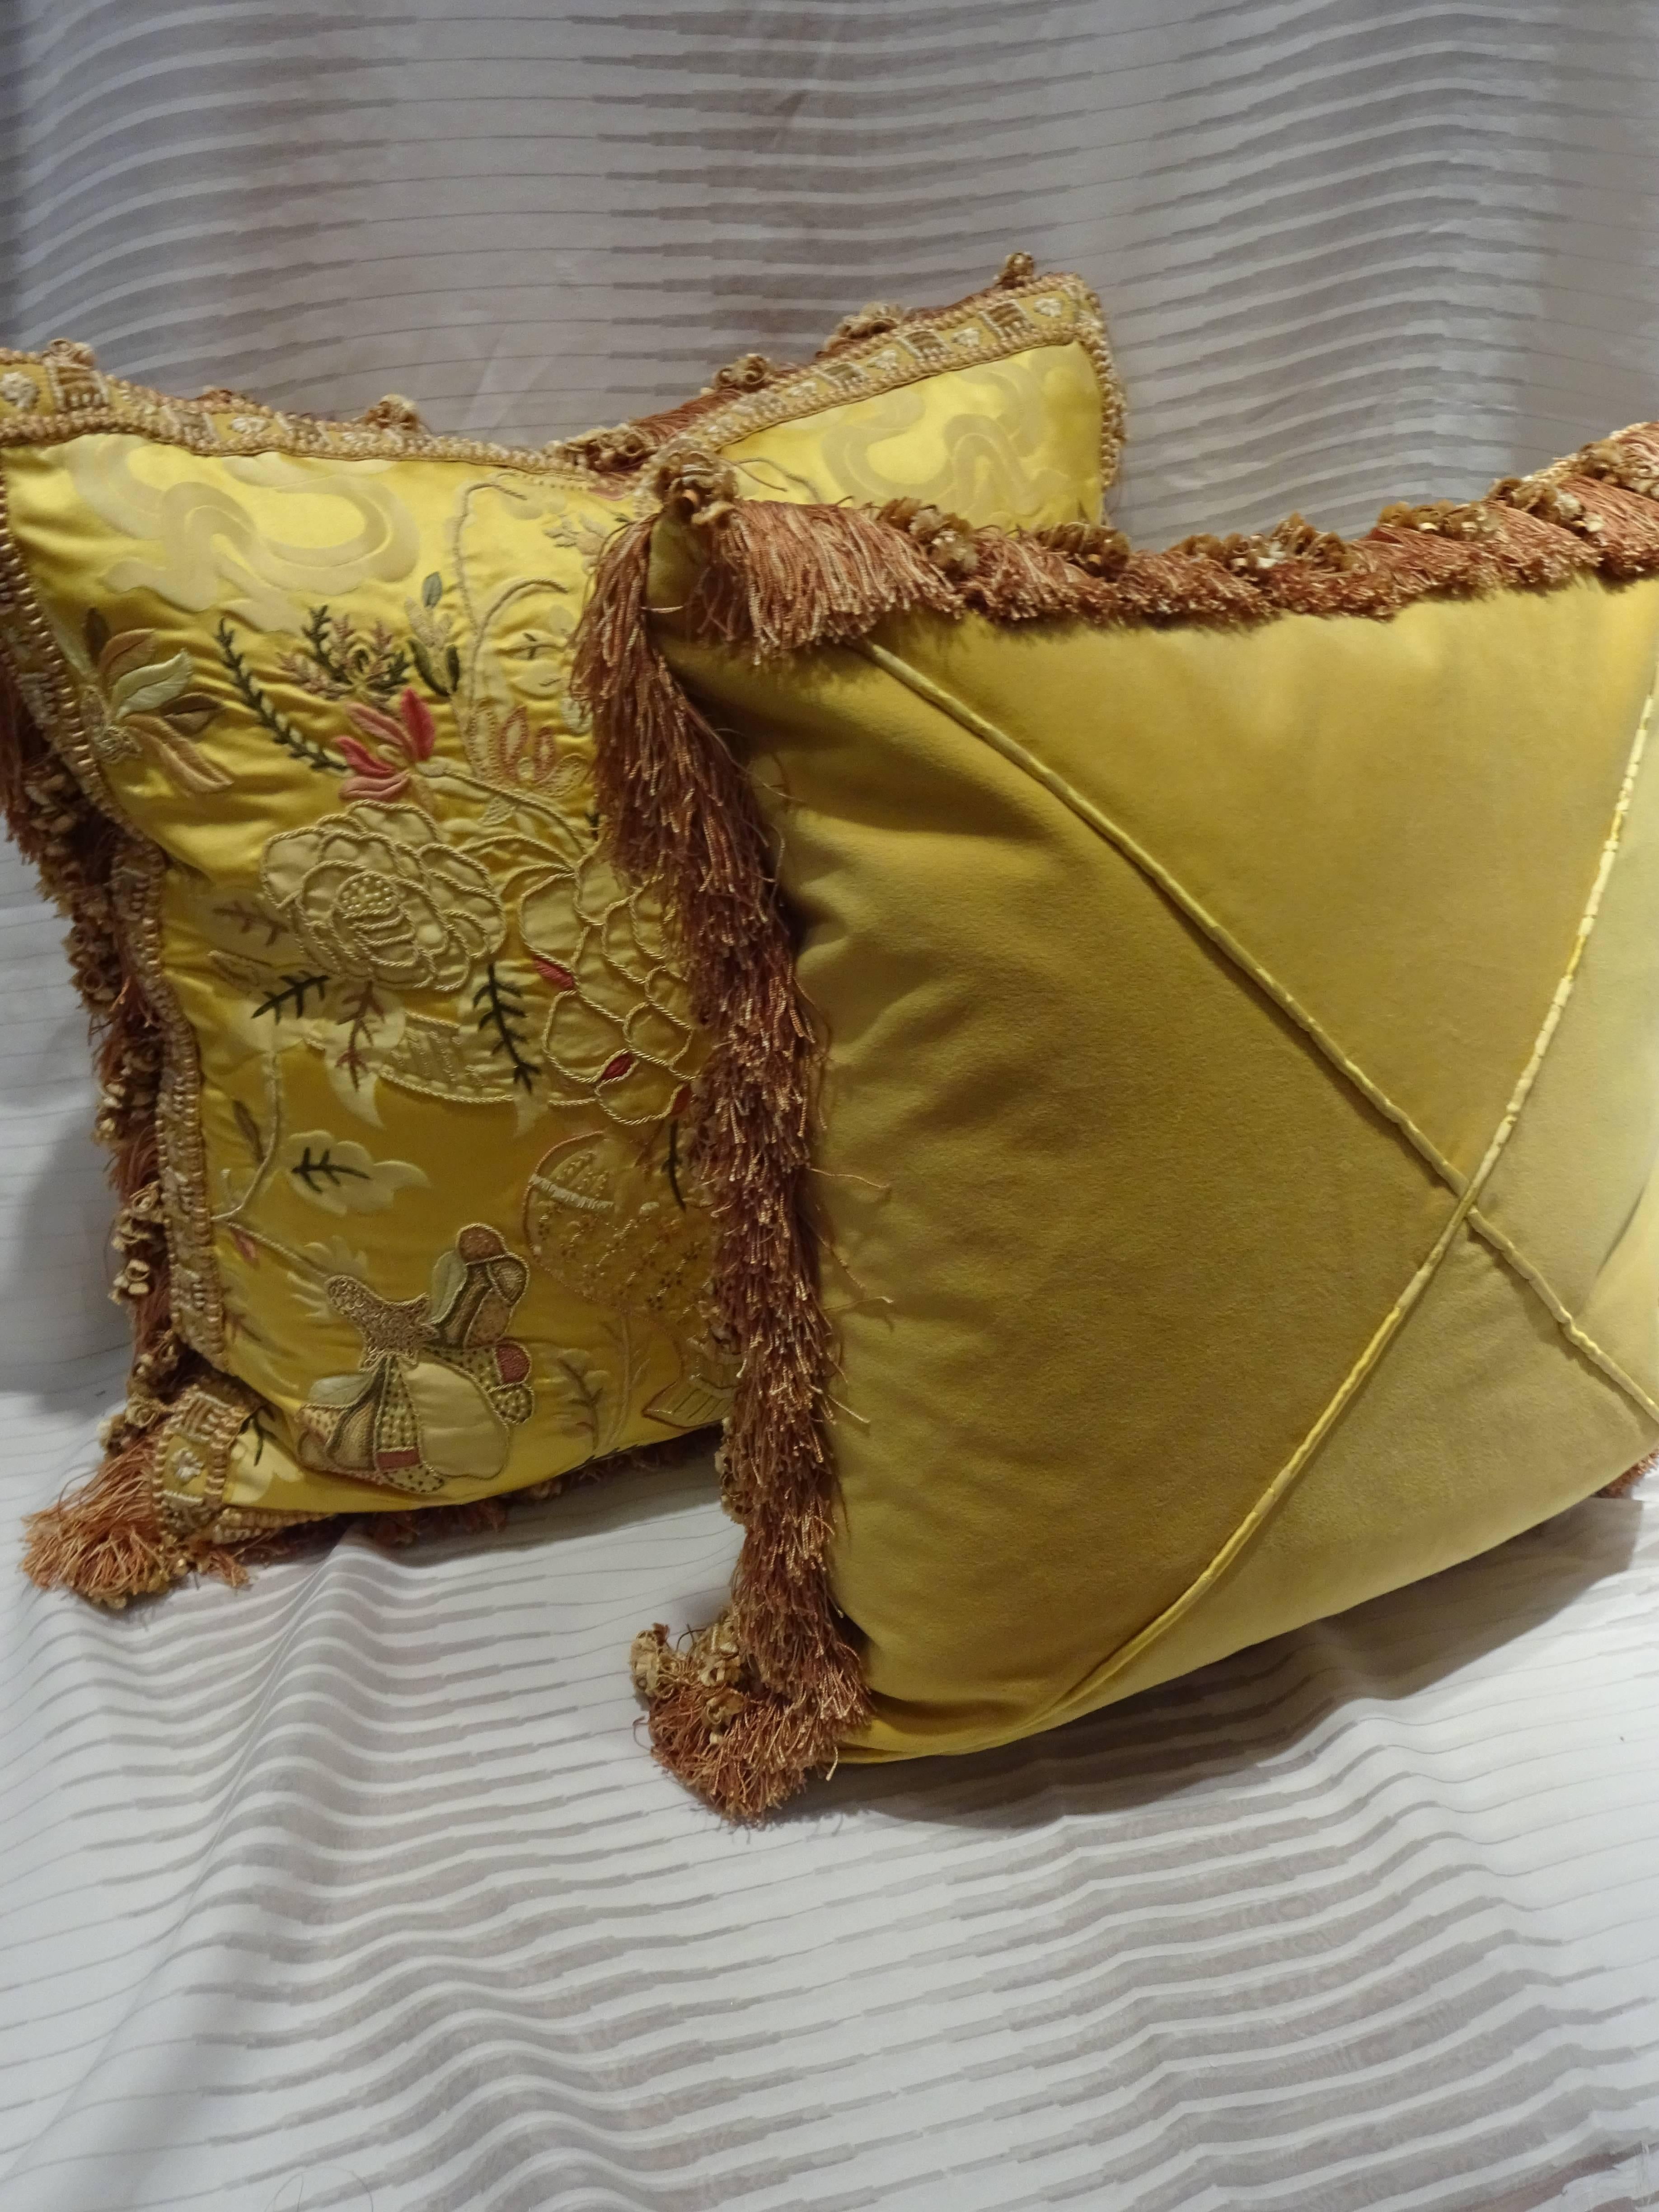 Luxurious embroidered pillows, new bright yellow.
Scalamandre fabric front.
Plain velvet fabric back with damask fabric welt.
Rich gimp and tassel fringe.
Size 20